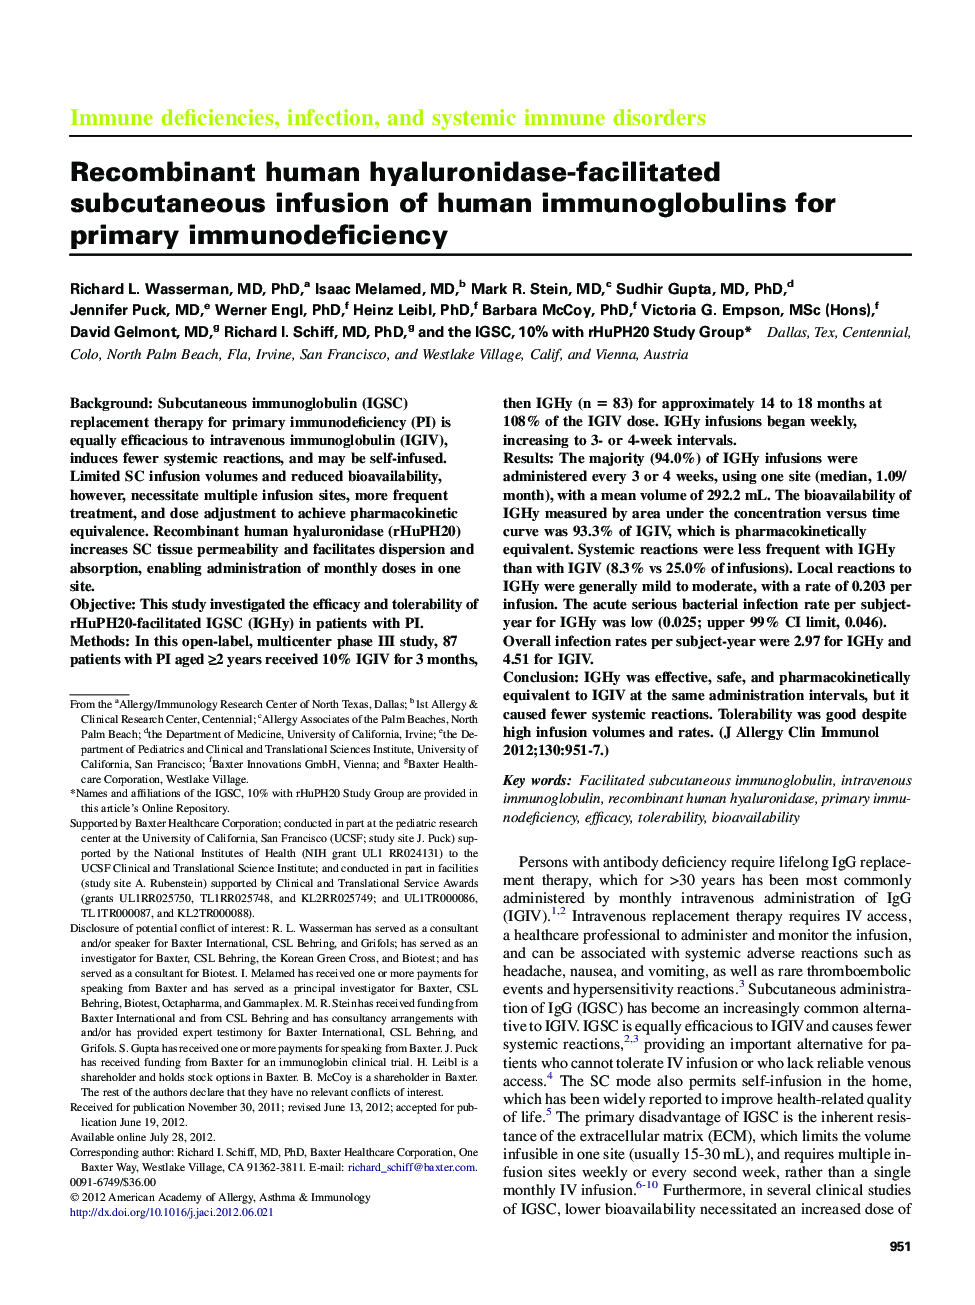 Recombinant human hyaluronidase-facilitated subcutaneous infusion of human immunoglobulins for primary immunodeficiency